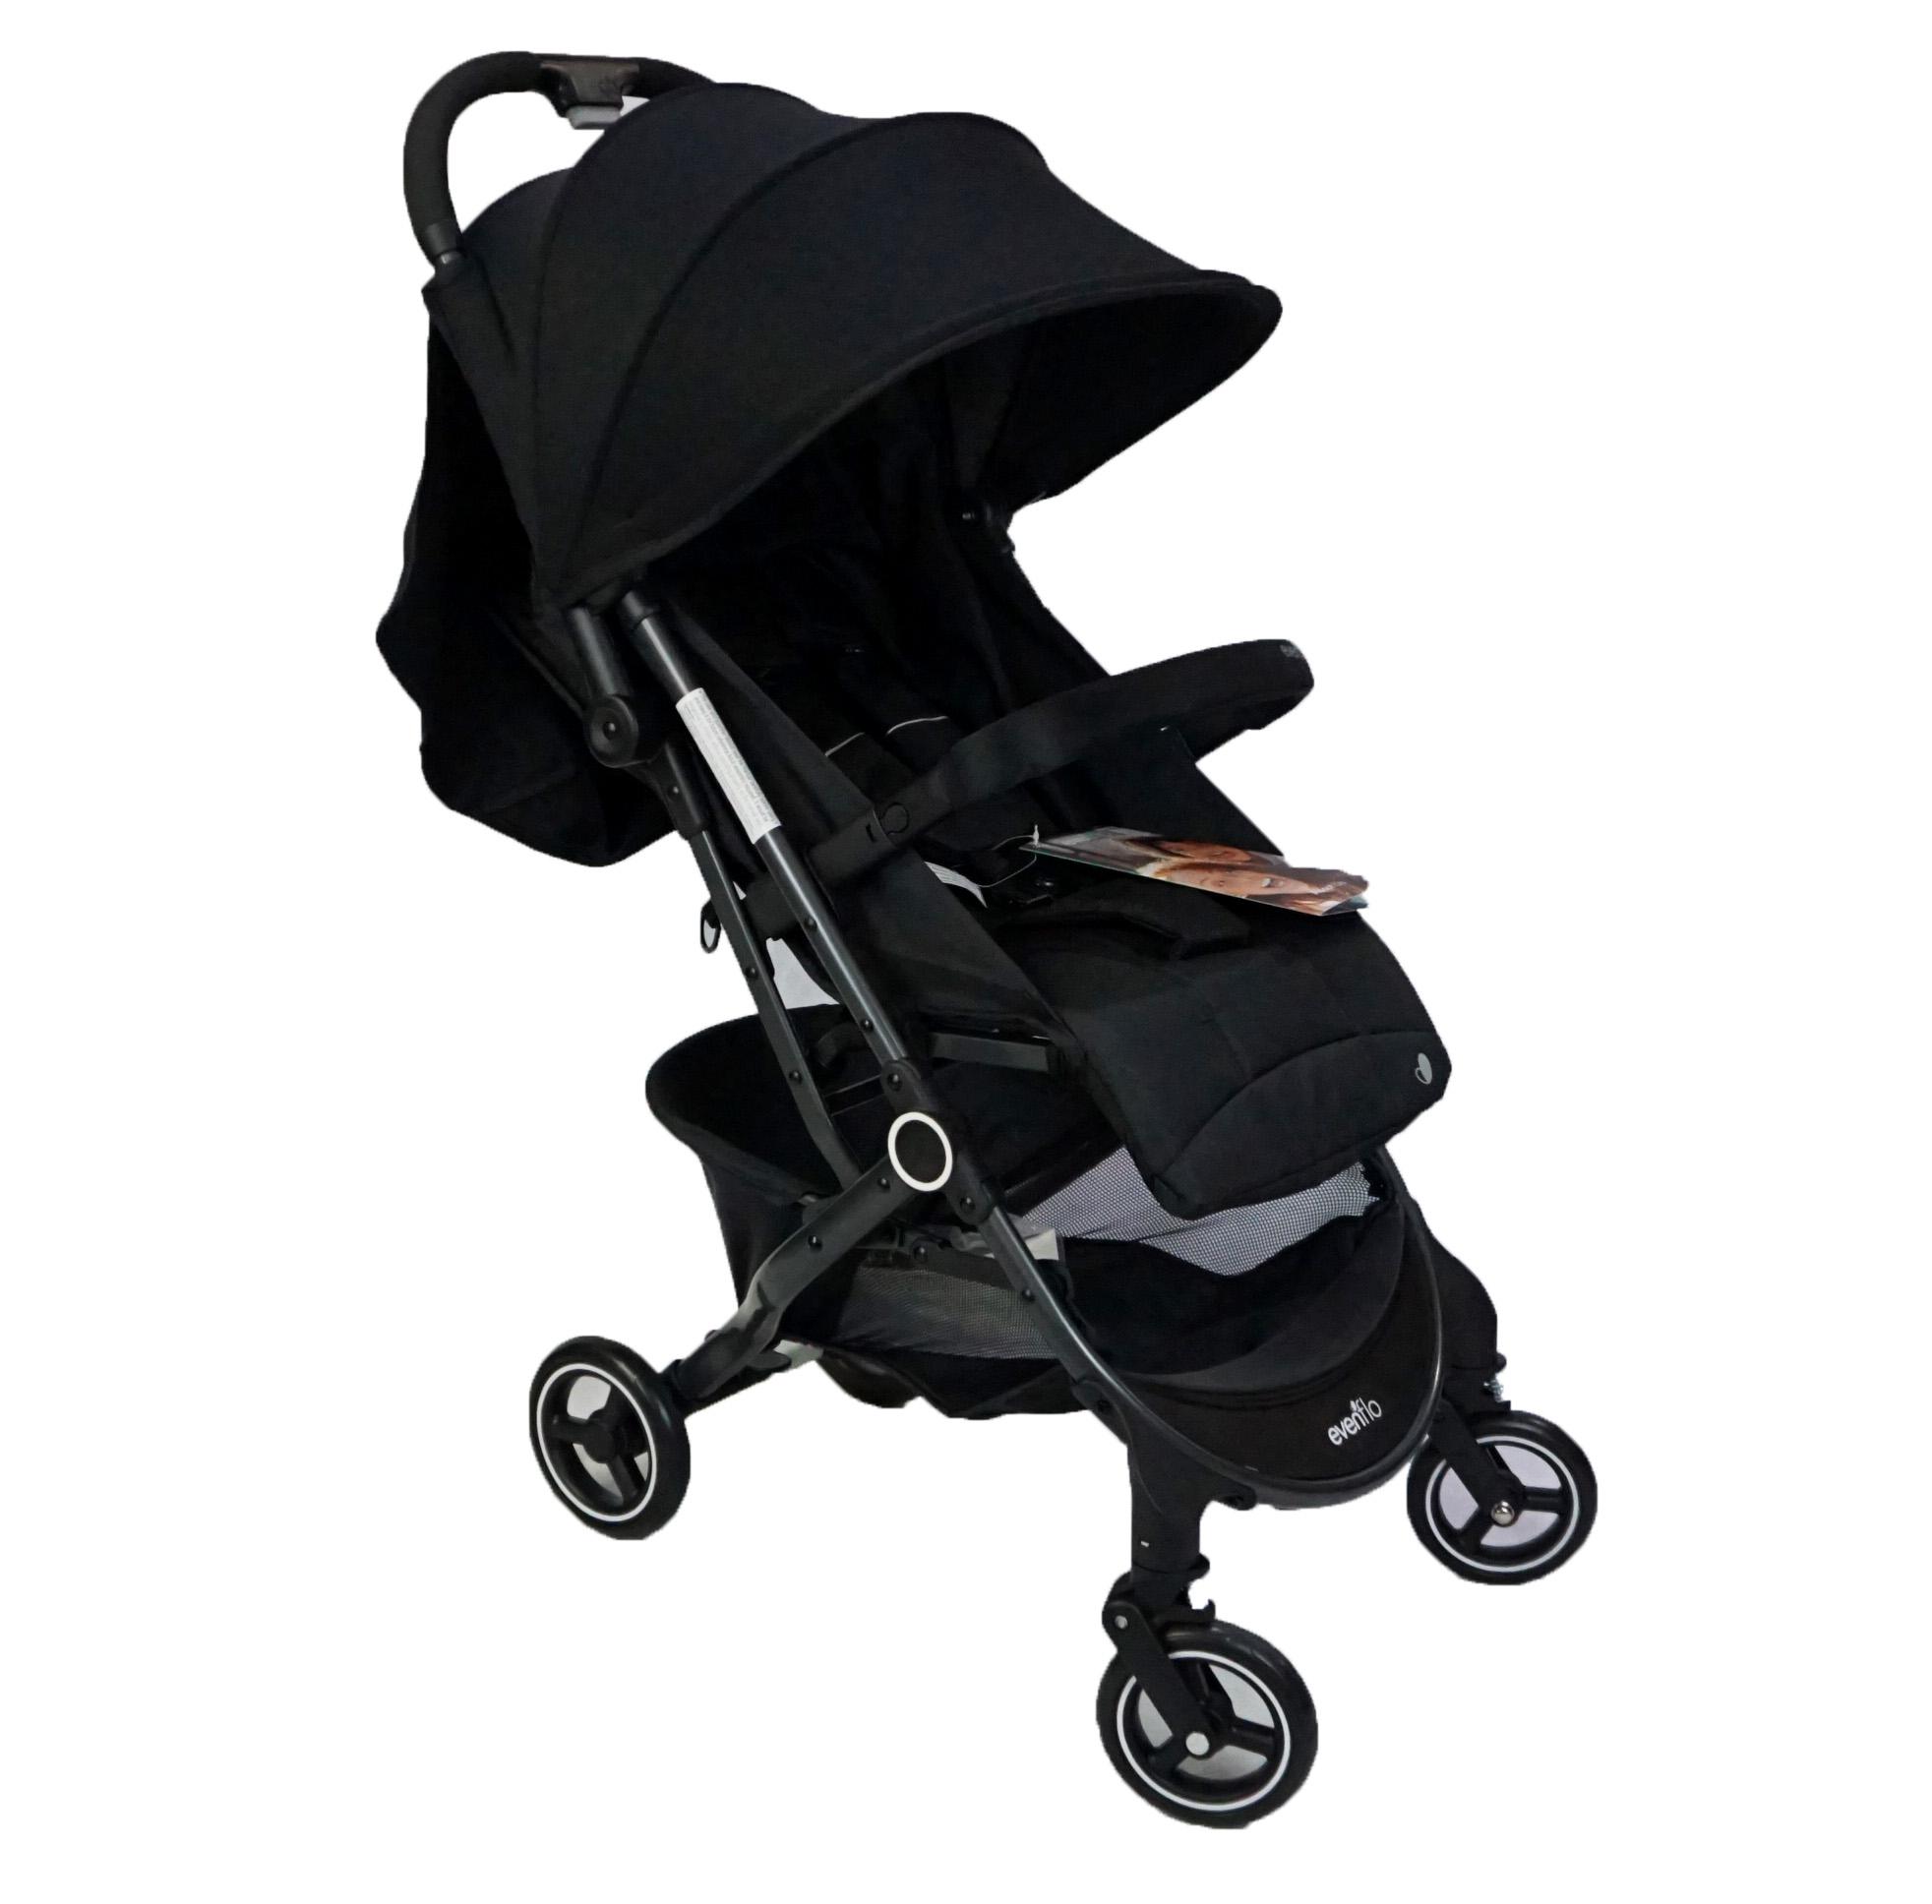 how much is a pocket stroller